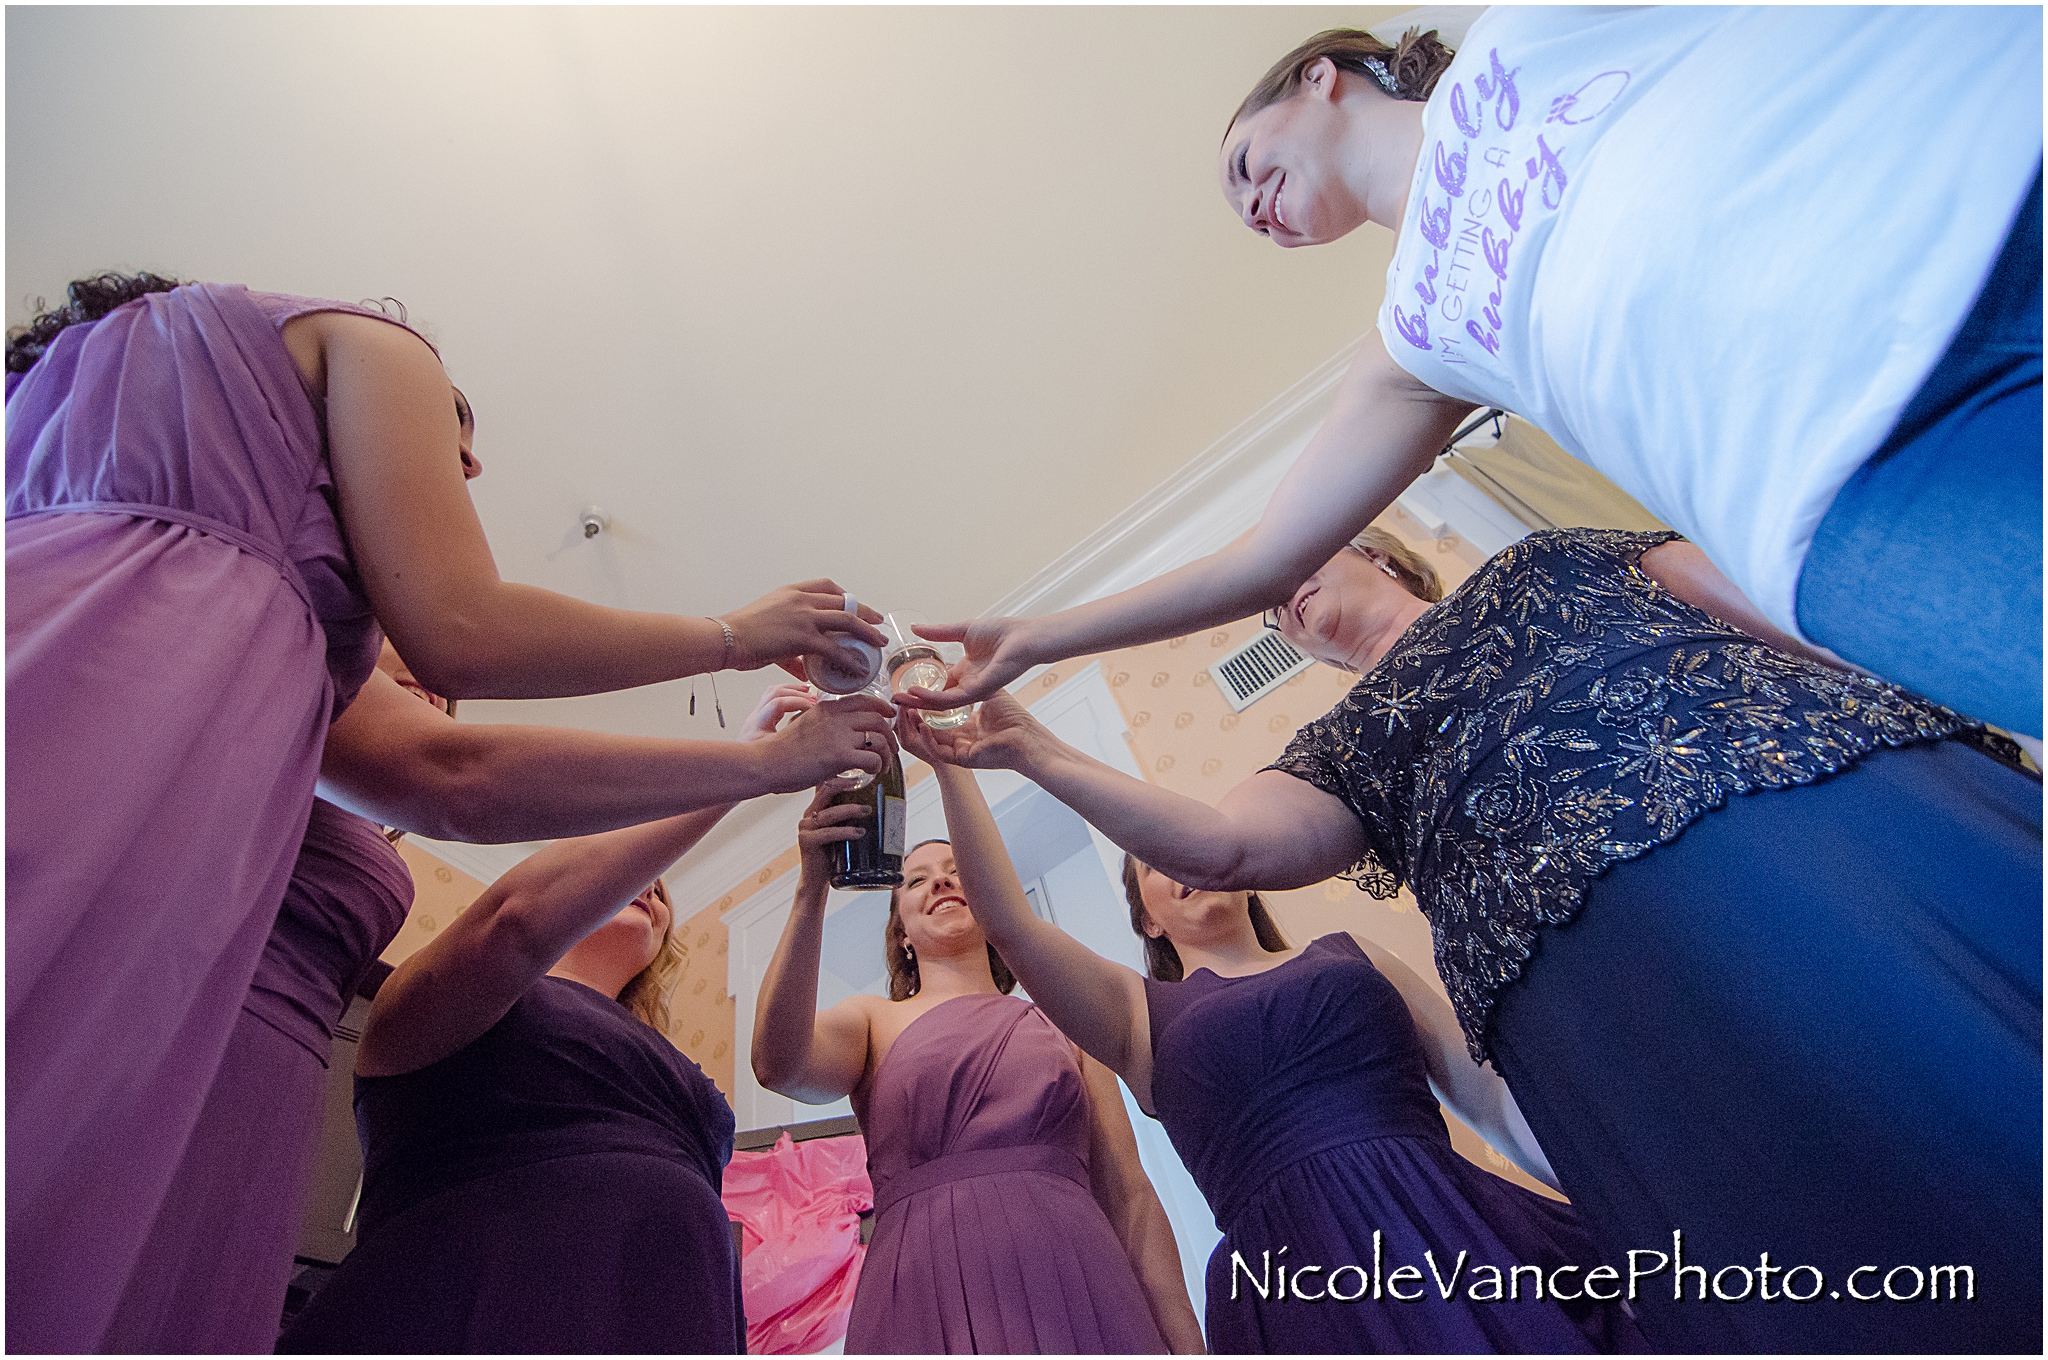 The bridesmaids toast the bride in the Bridal Suite at the Linden Row Inn.